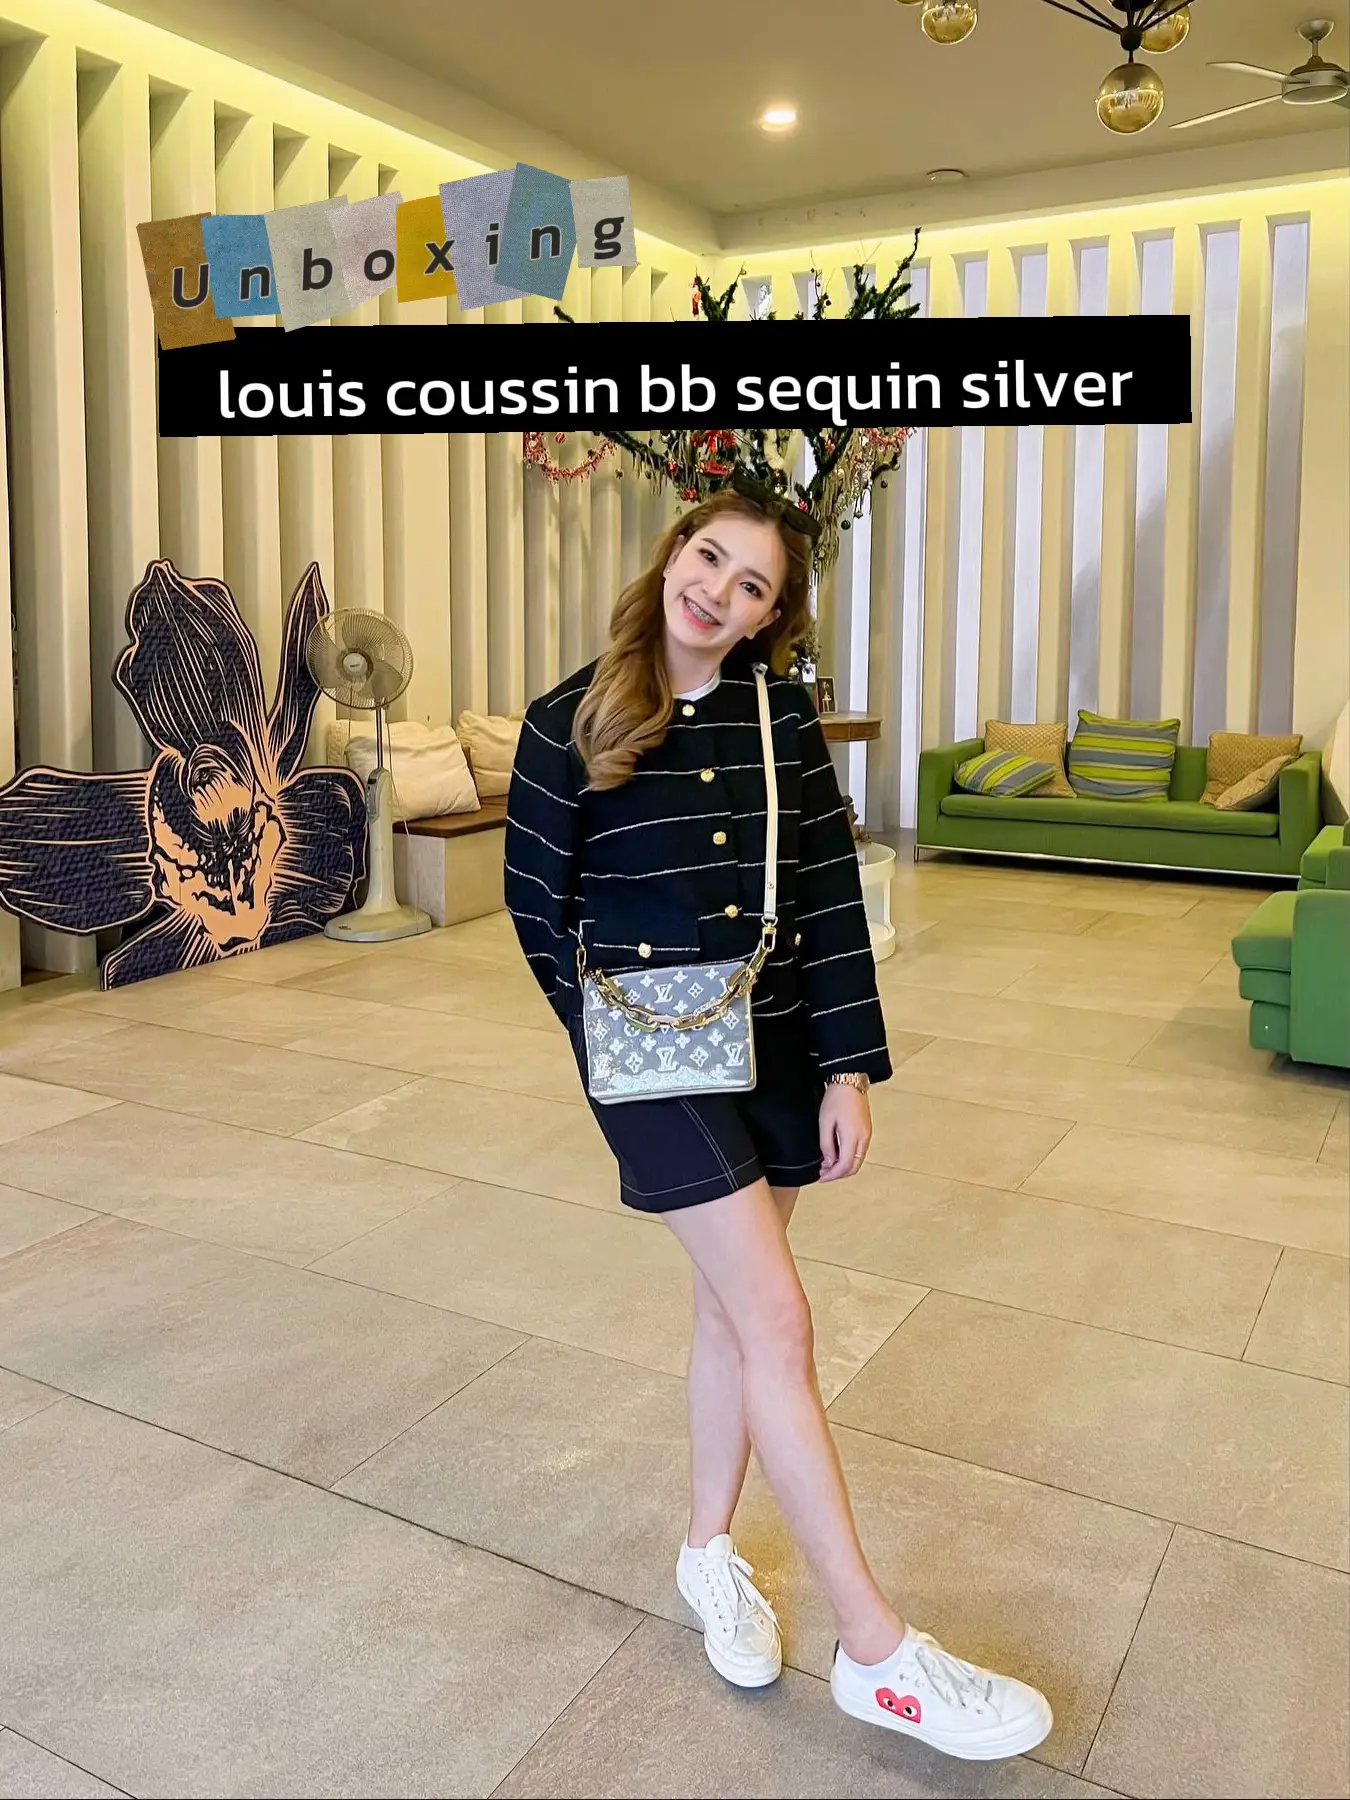 Unboxing louis coussin bb sequin silver✨, Video published by ggginging